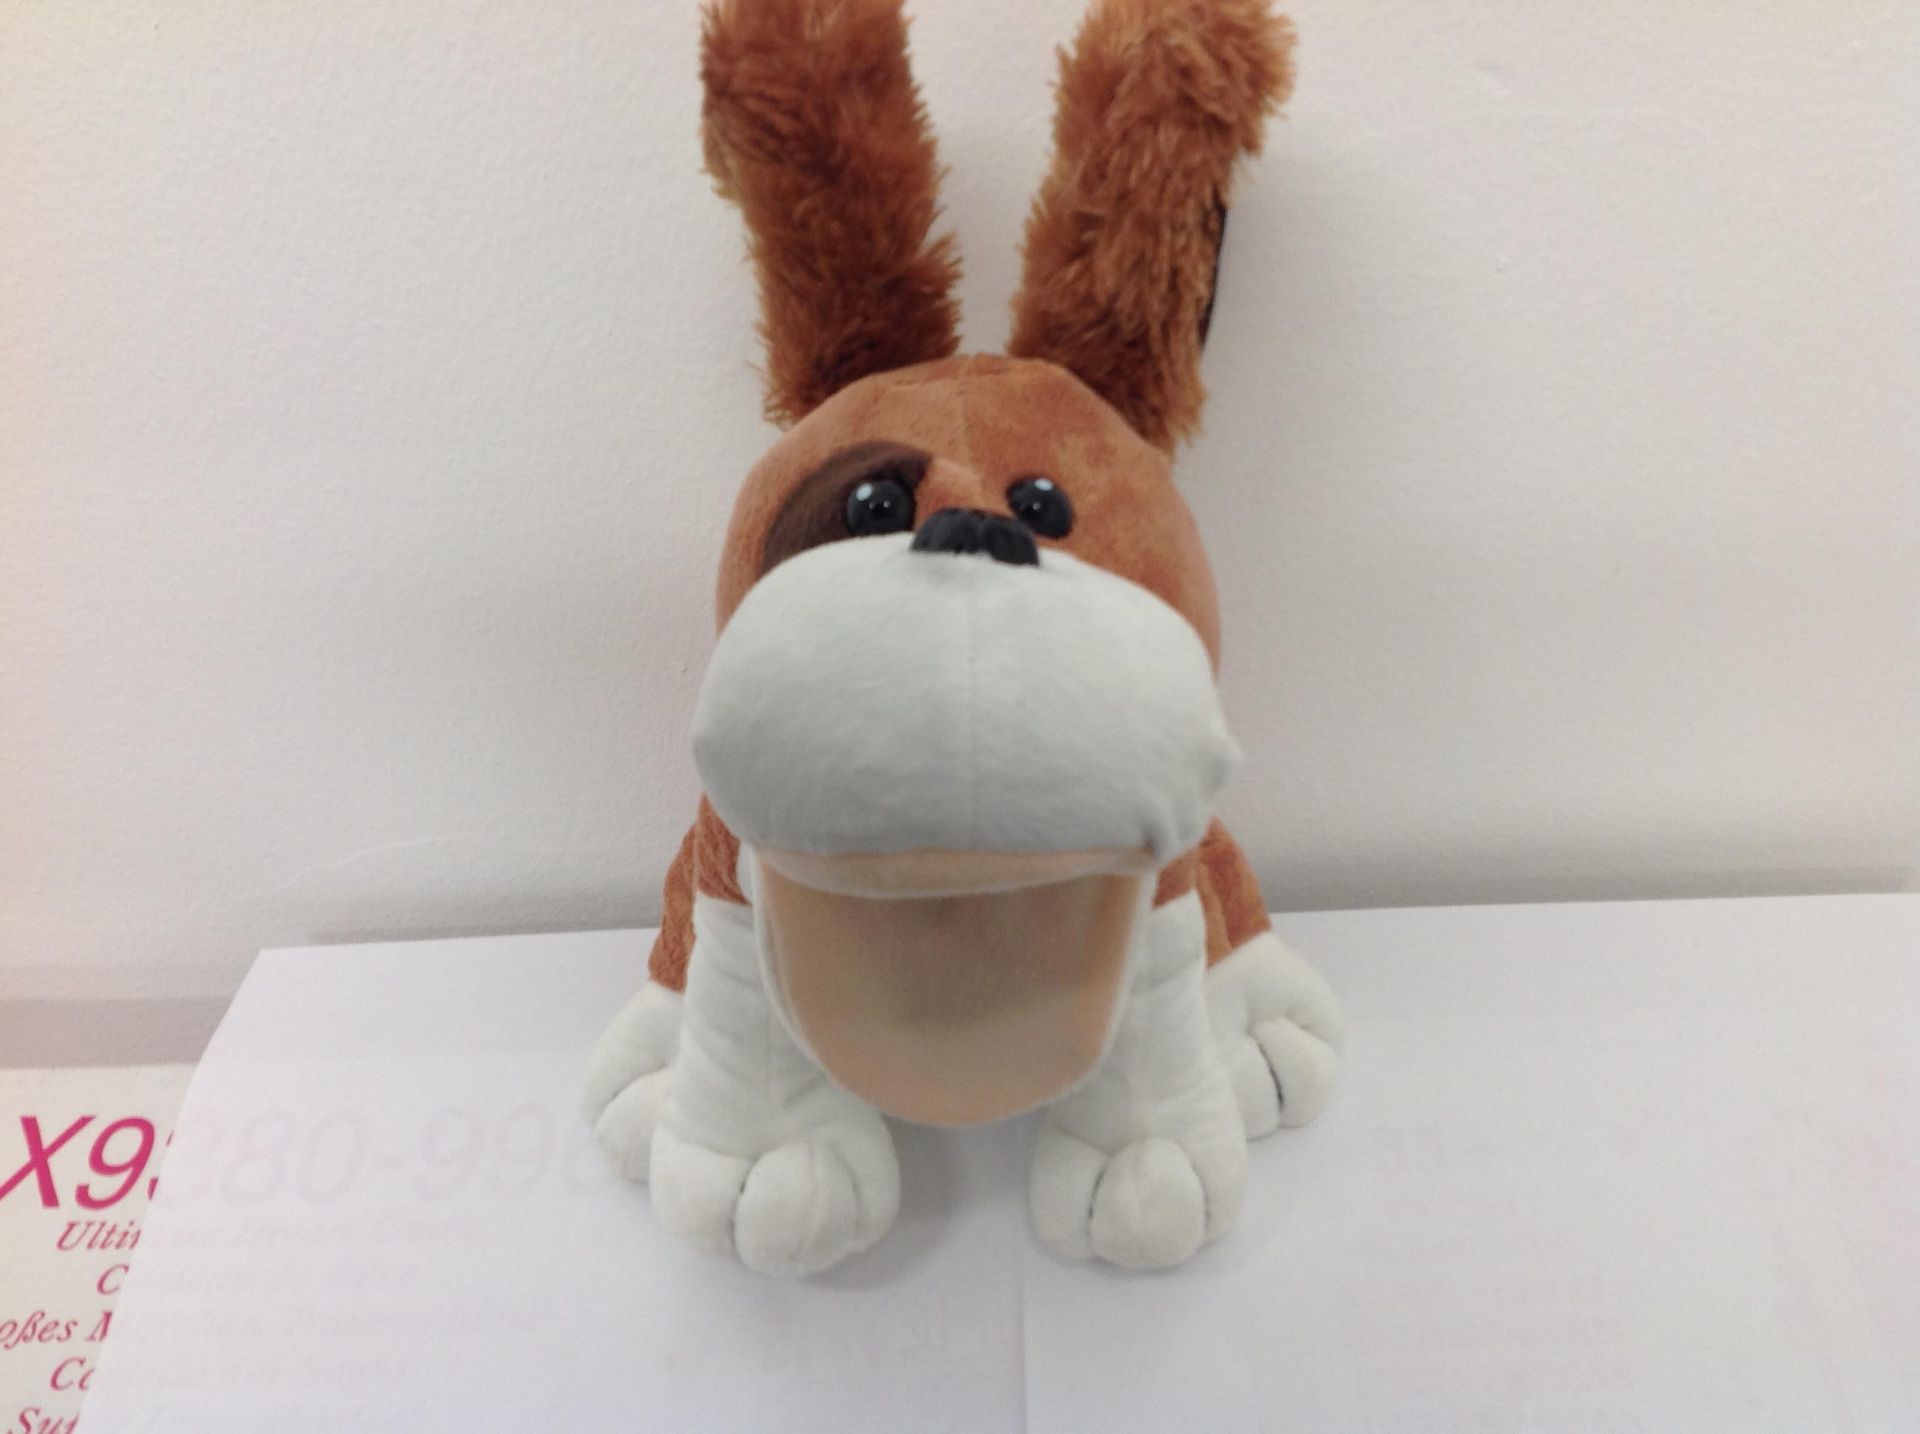 20 x Brite Power Talking Large Dog Hand Puppet. Brand new stock. RRP £19.99 each, total original RRP